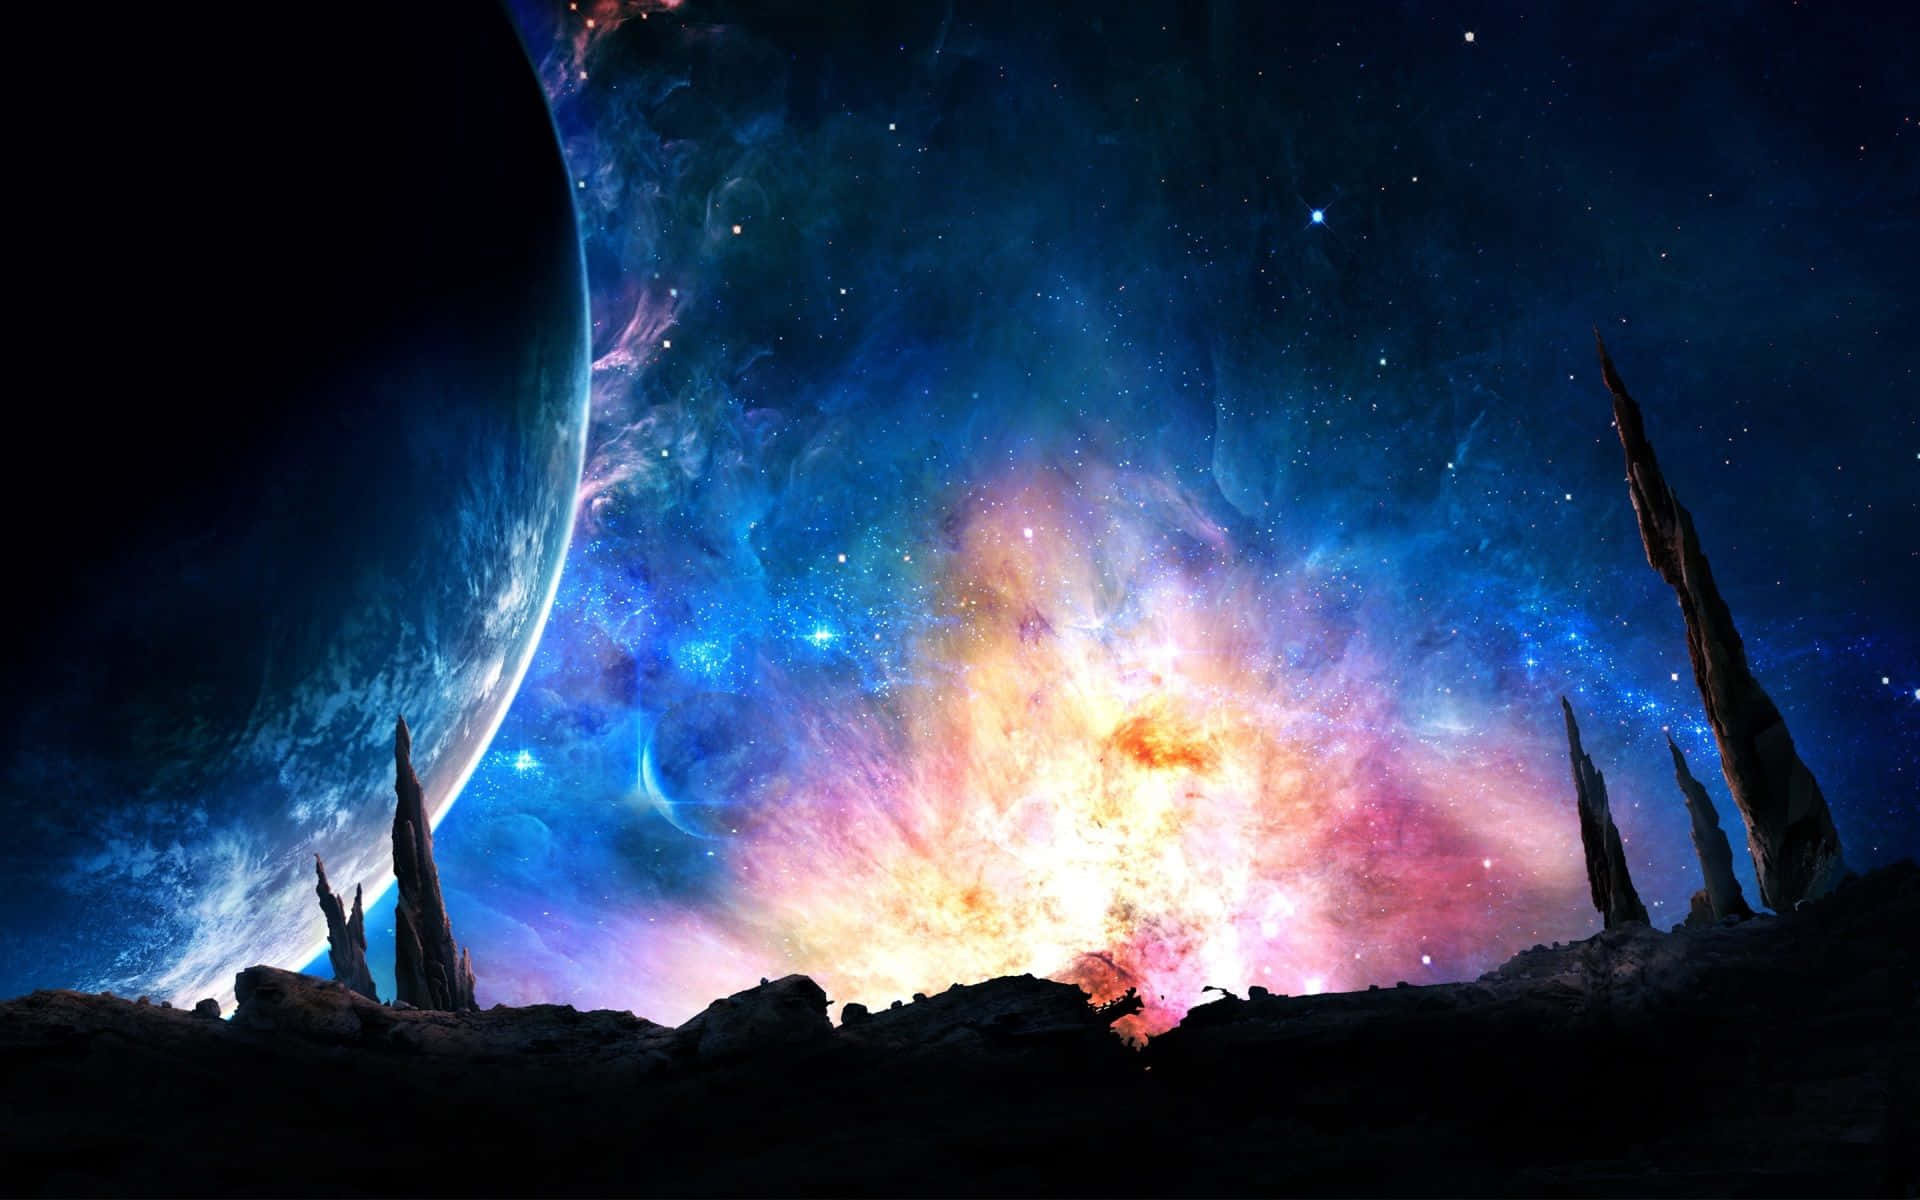 Take a journey to the depths of space to explore and observe the unique beauty of the night sky. Wallpaper